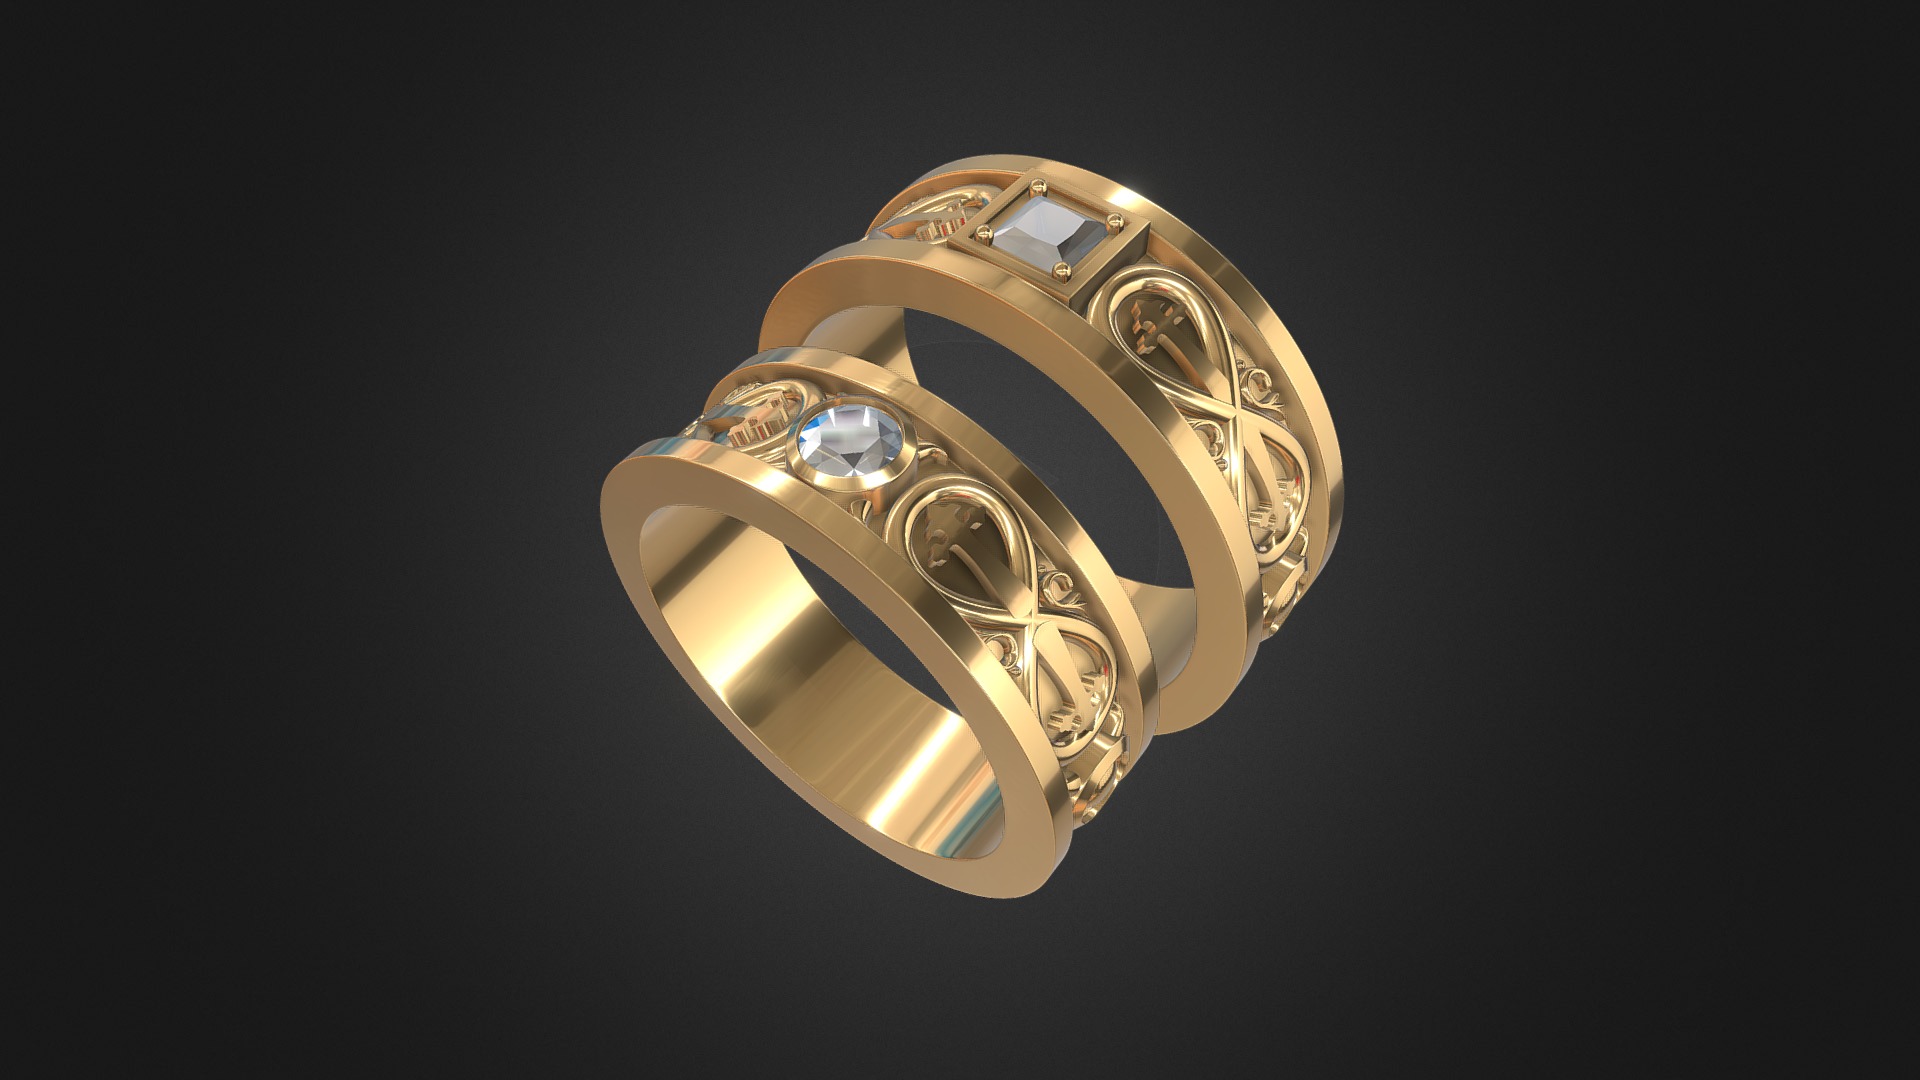 3D model 1047 – Rings - This is a 3D model of the 1047 - Rings. The 3D model is about a gold and silver ring.